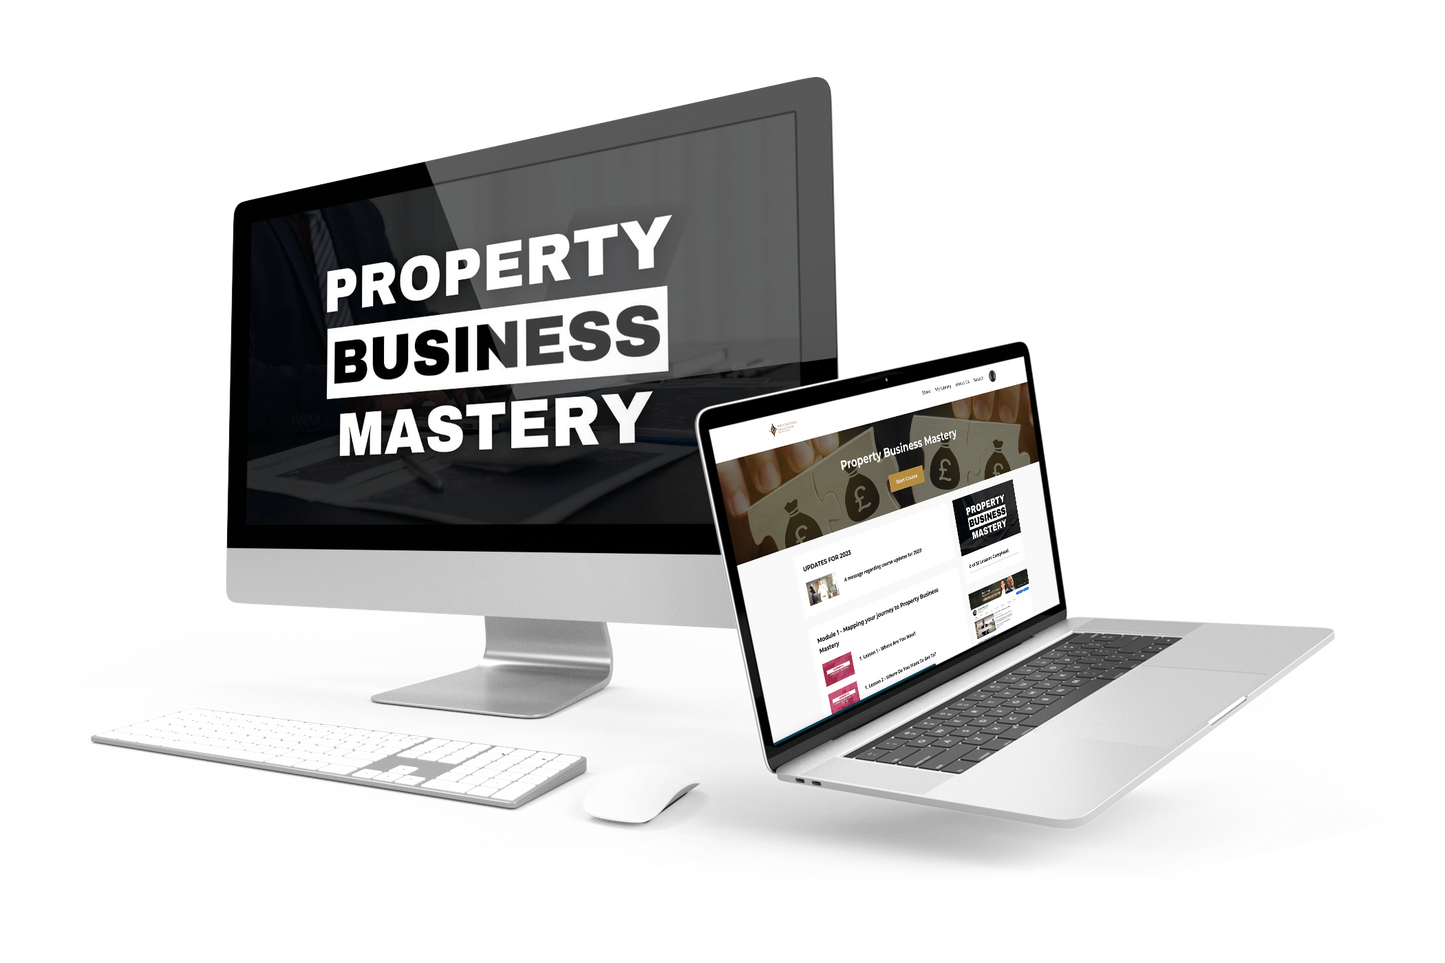 TS - Property Business Mastery